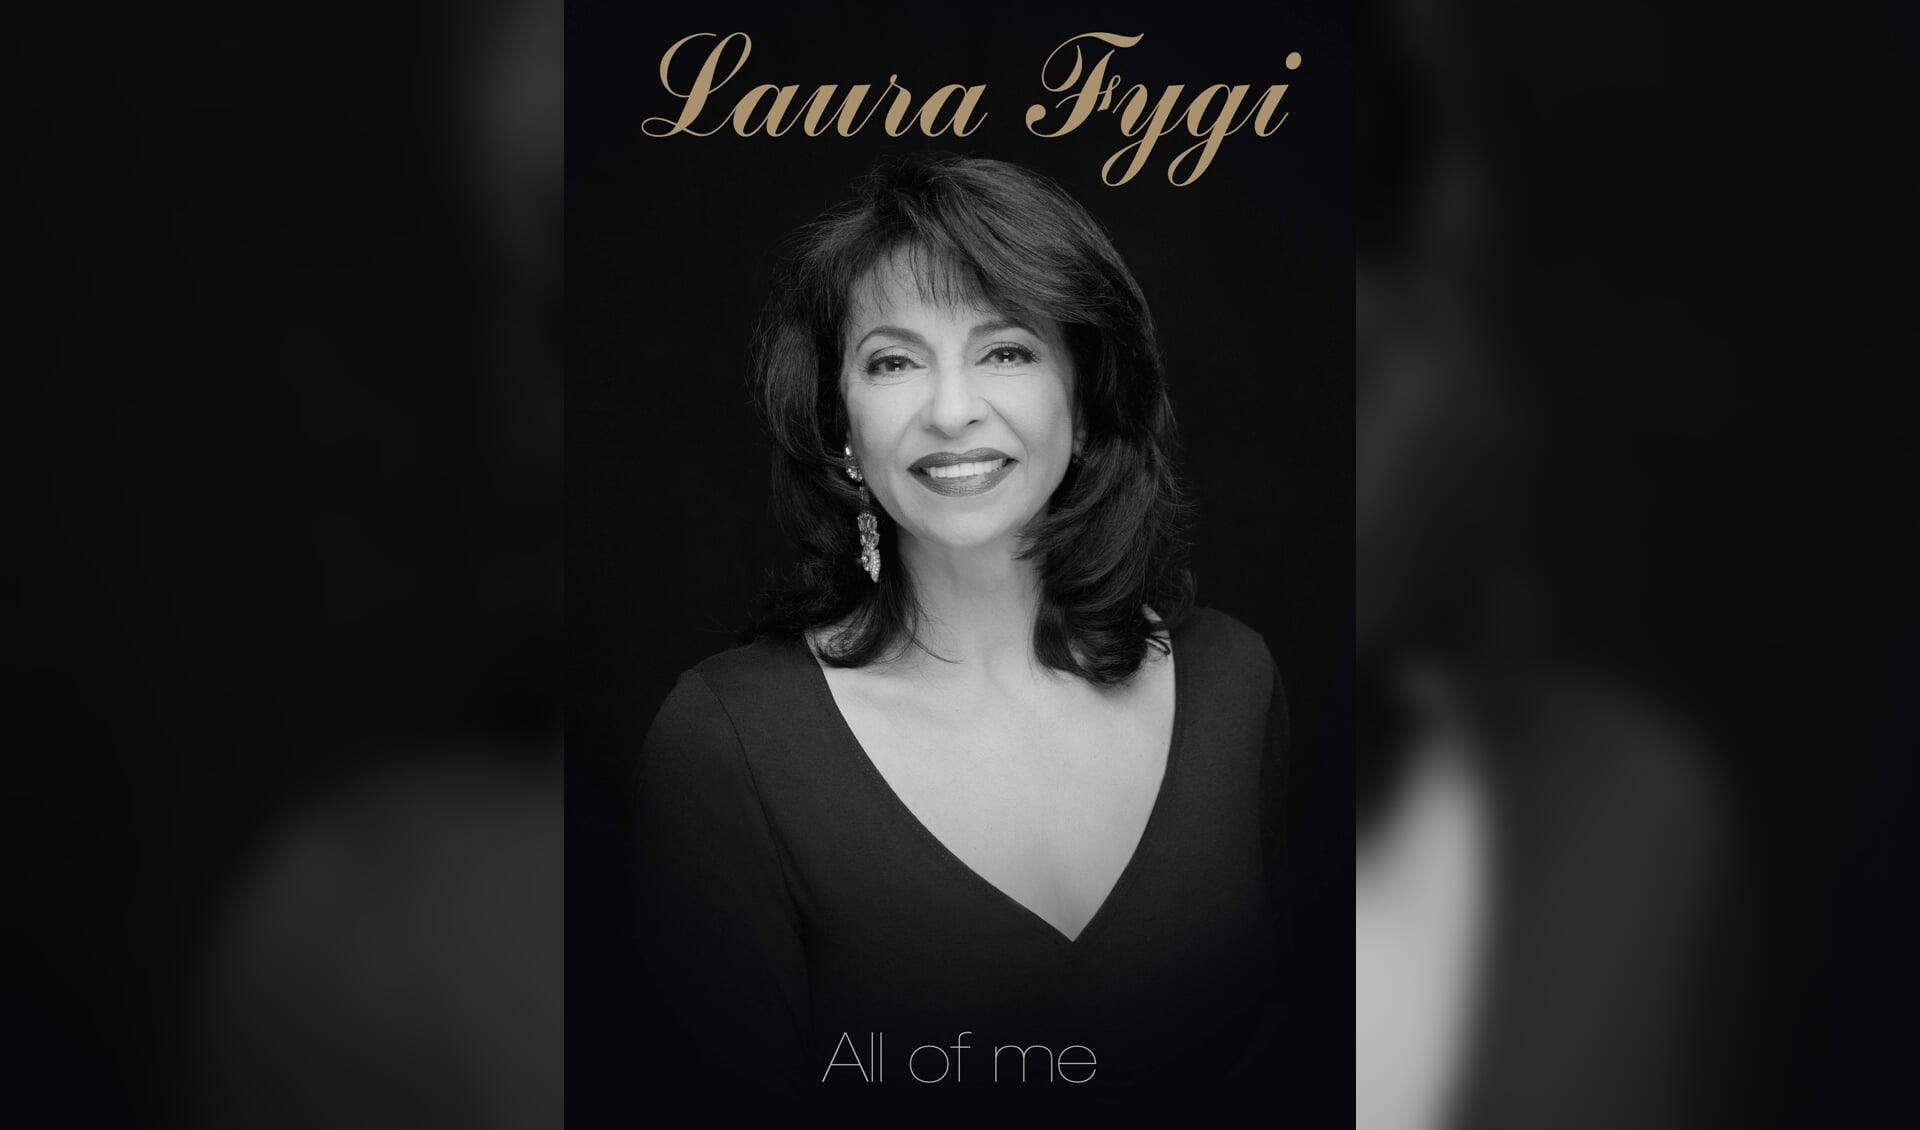 Laura Fygi - All of me